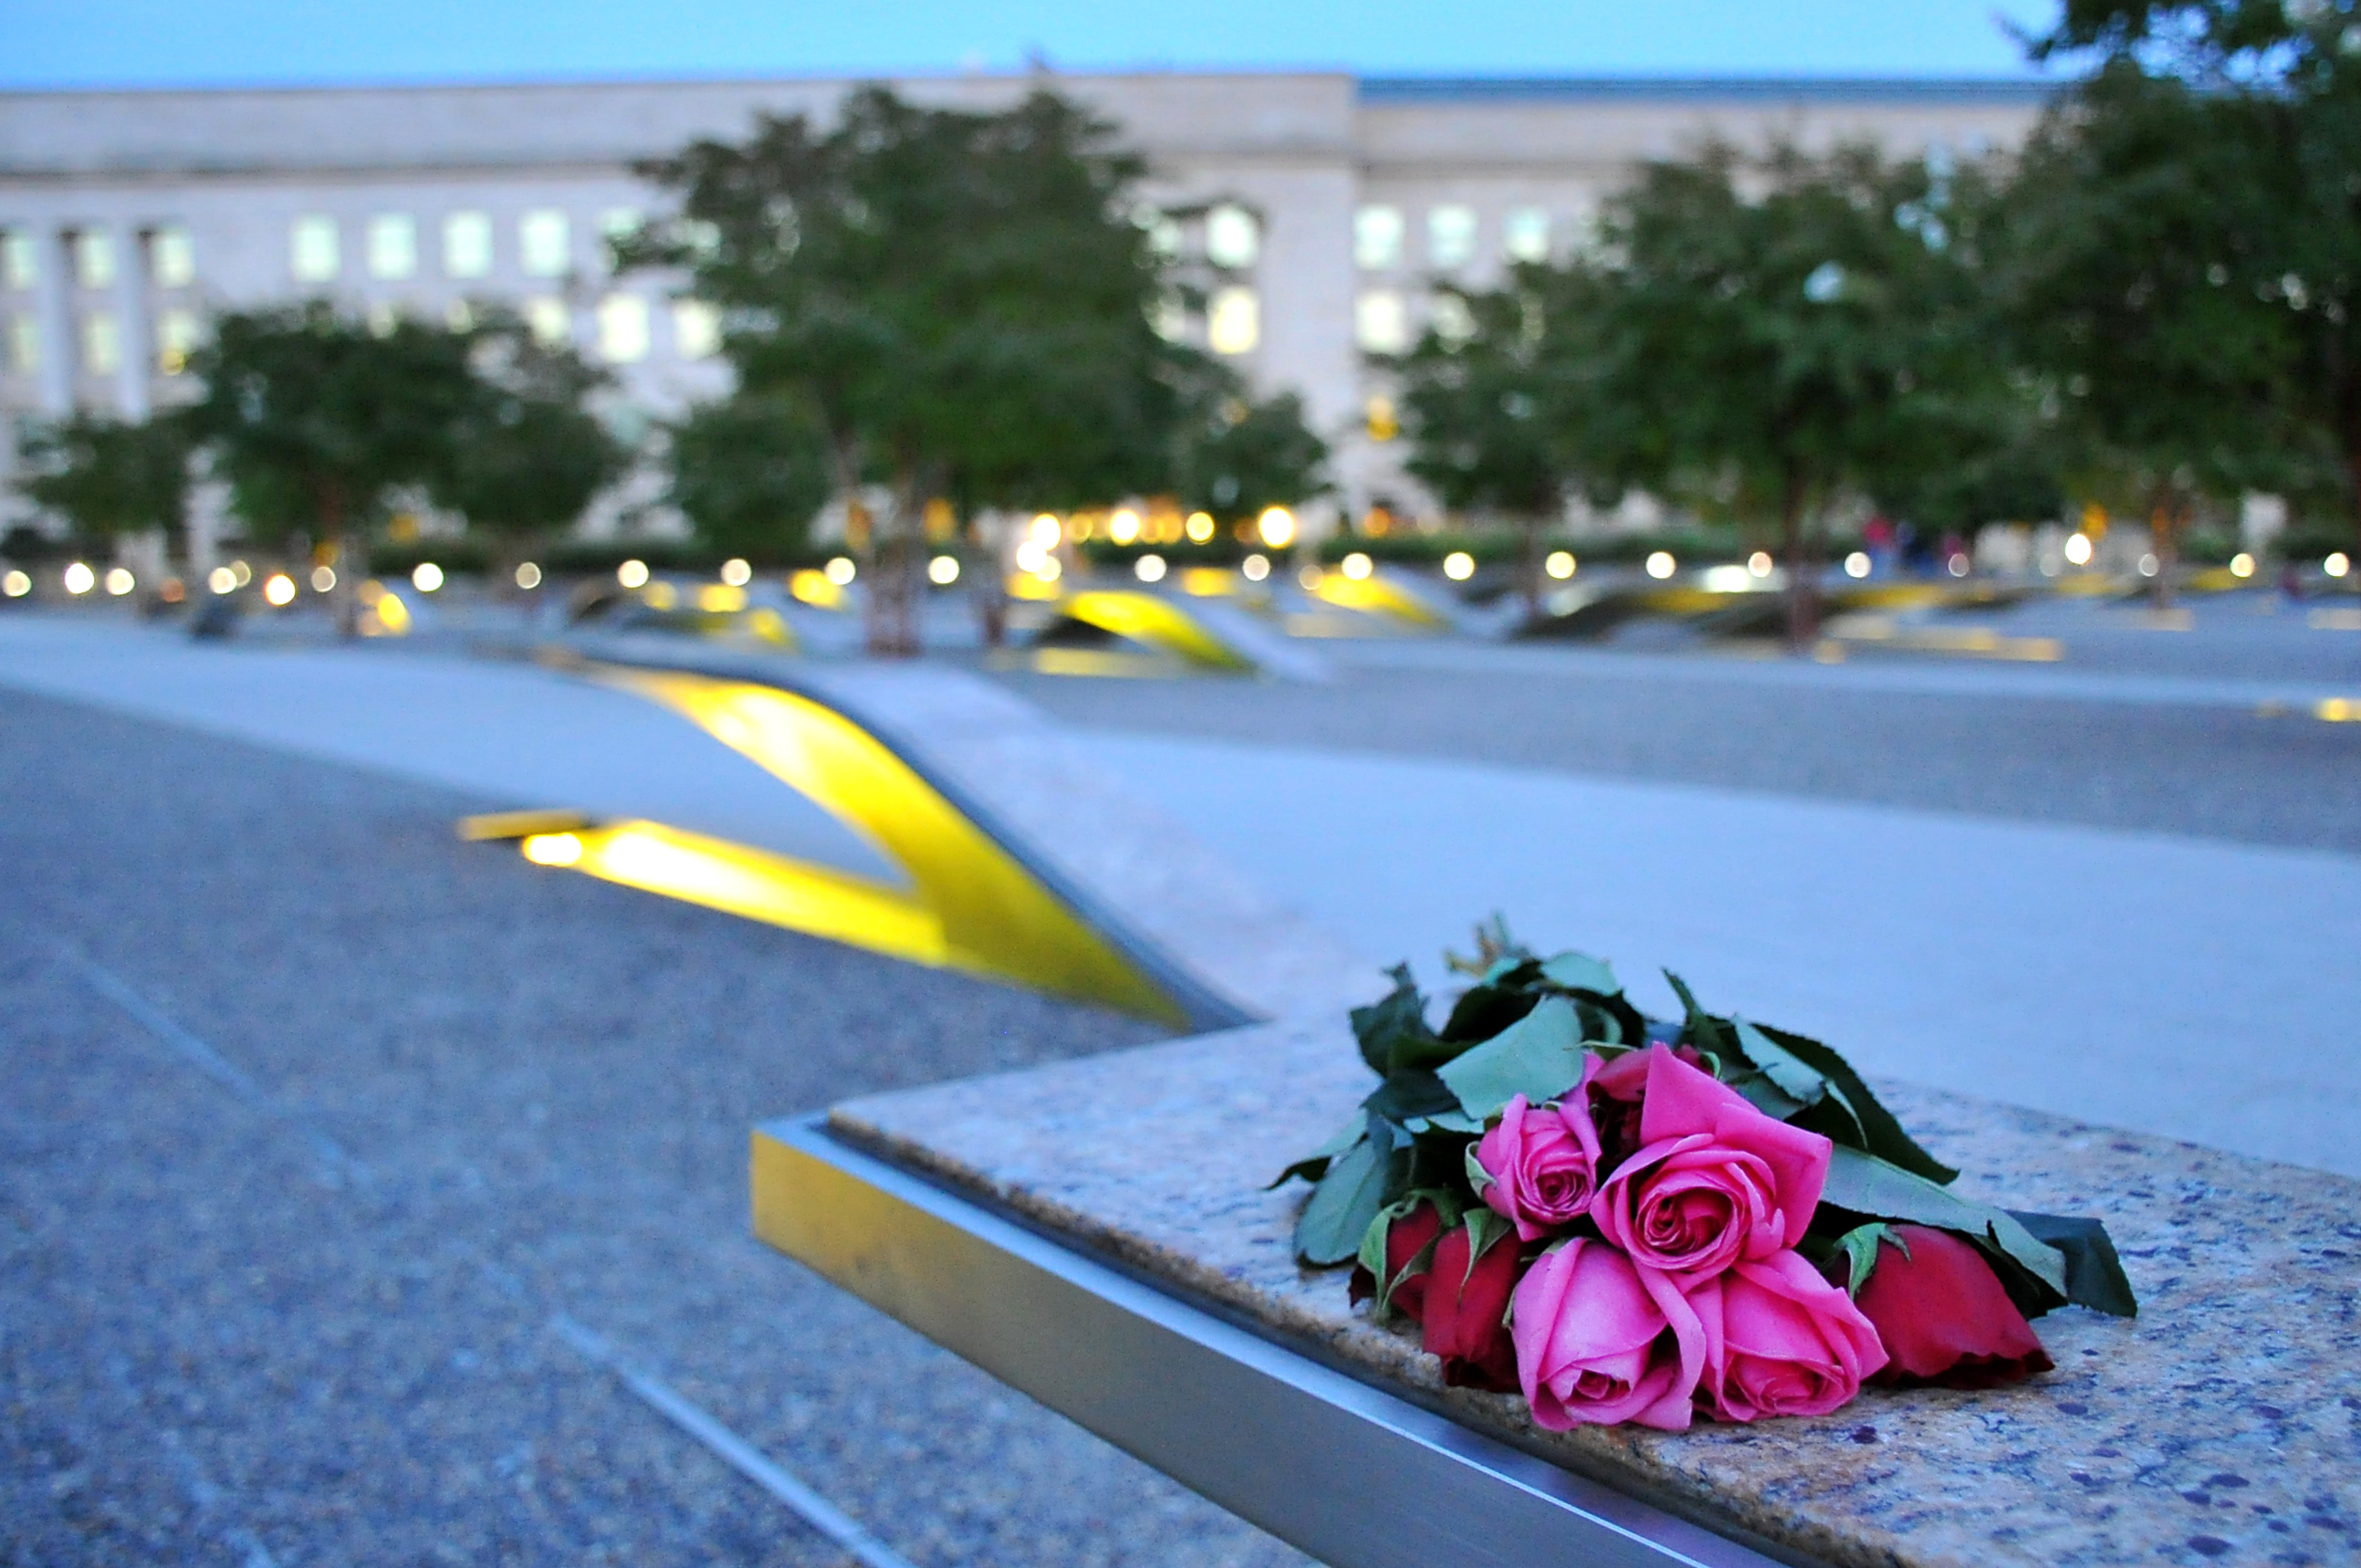 roses on a bench in front of the Pentagon building